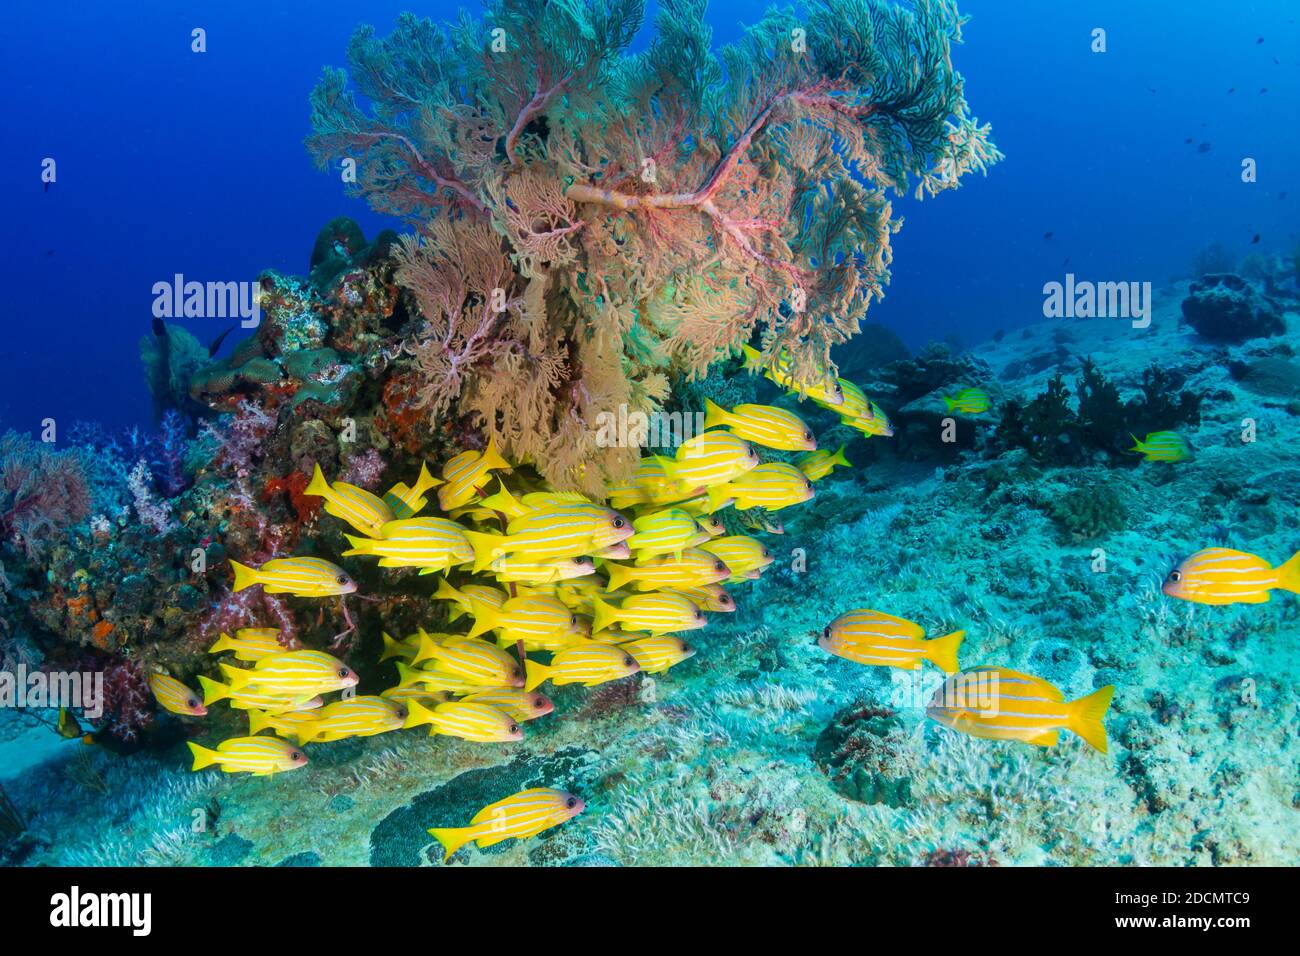 School of colorful 5 lined Snapper on a tropical coral reef in the Andaman Sea Stock Photo